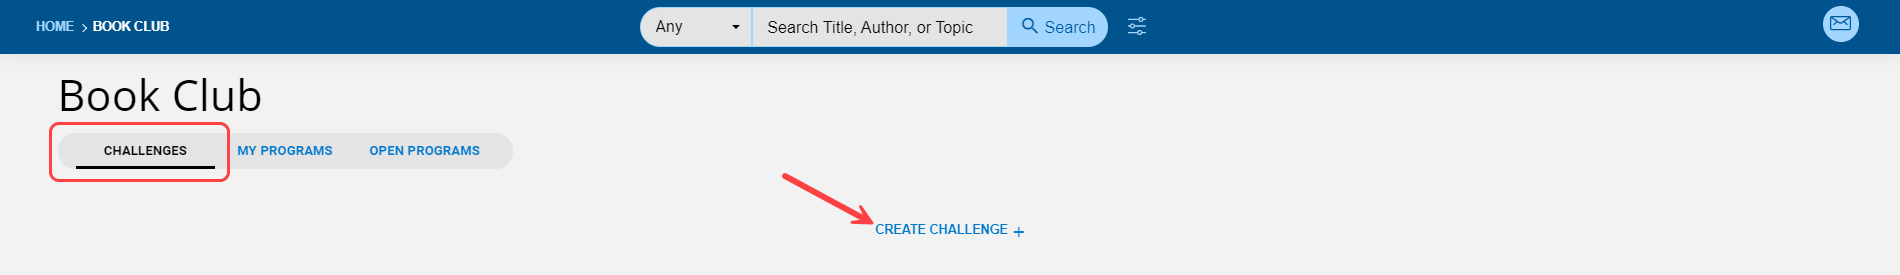 Book Club page with Challenges tab and Create Challenge option highlighted.